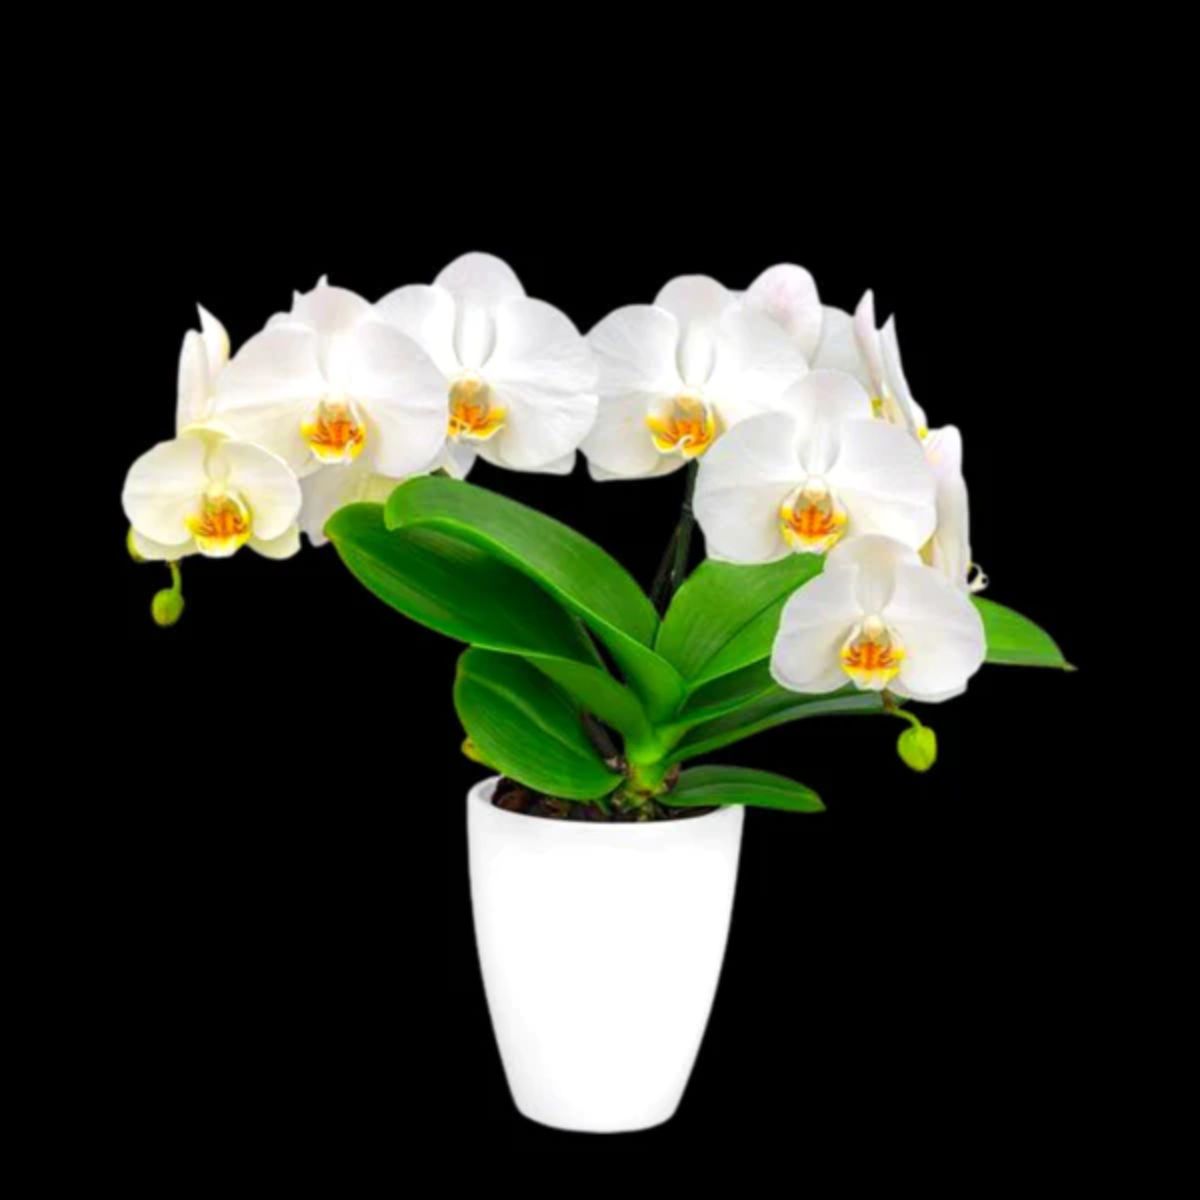 Phalaenopsis Grand Dessert orchid flower - exquisite and luxurious beauty for your home or office decor